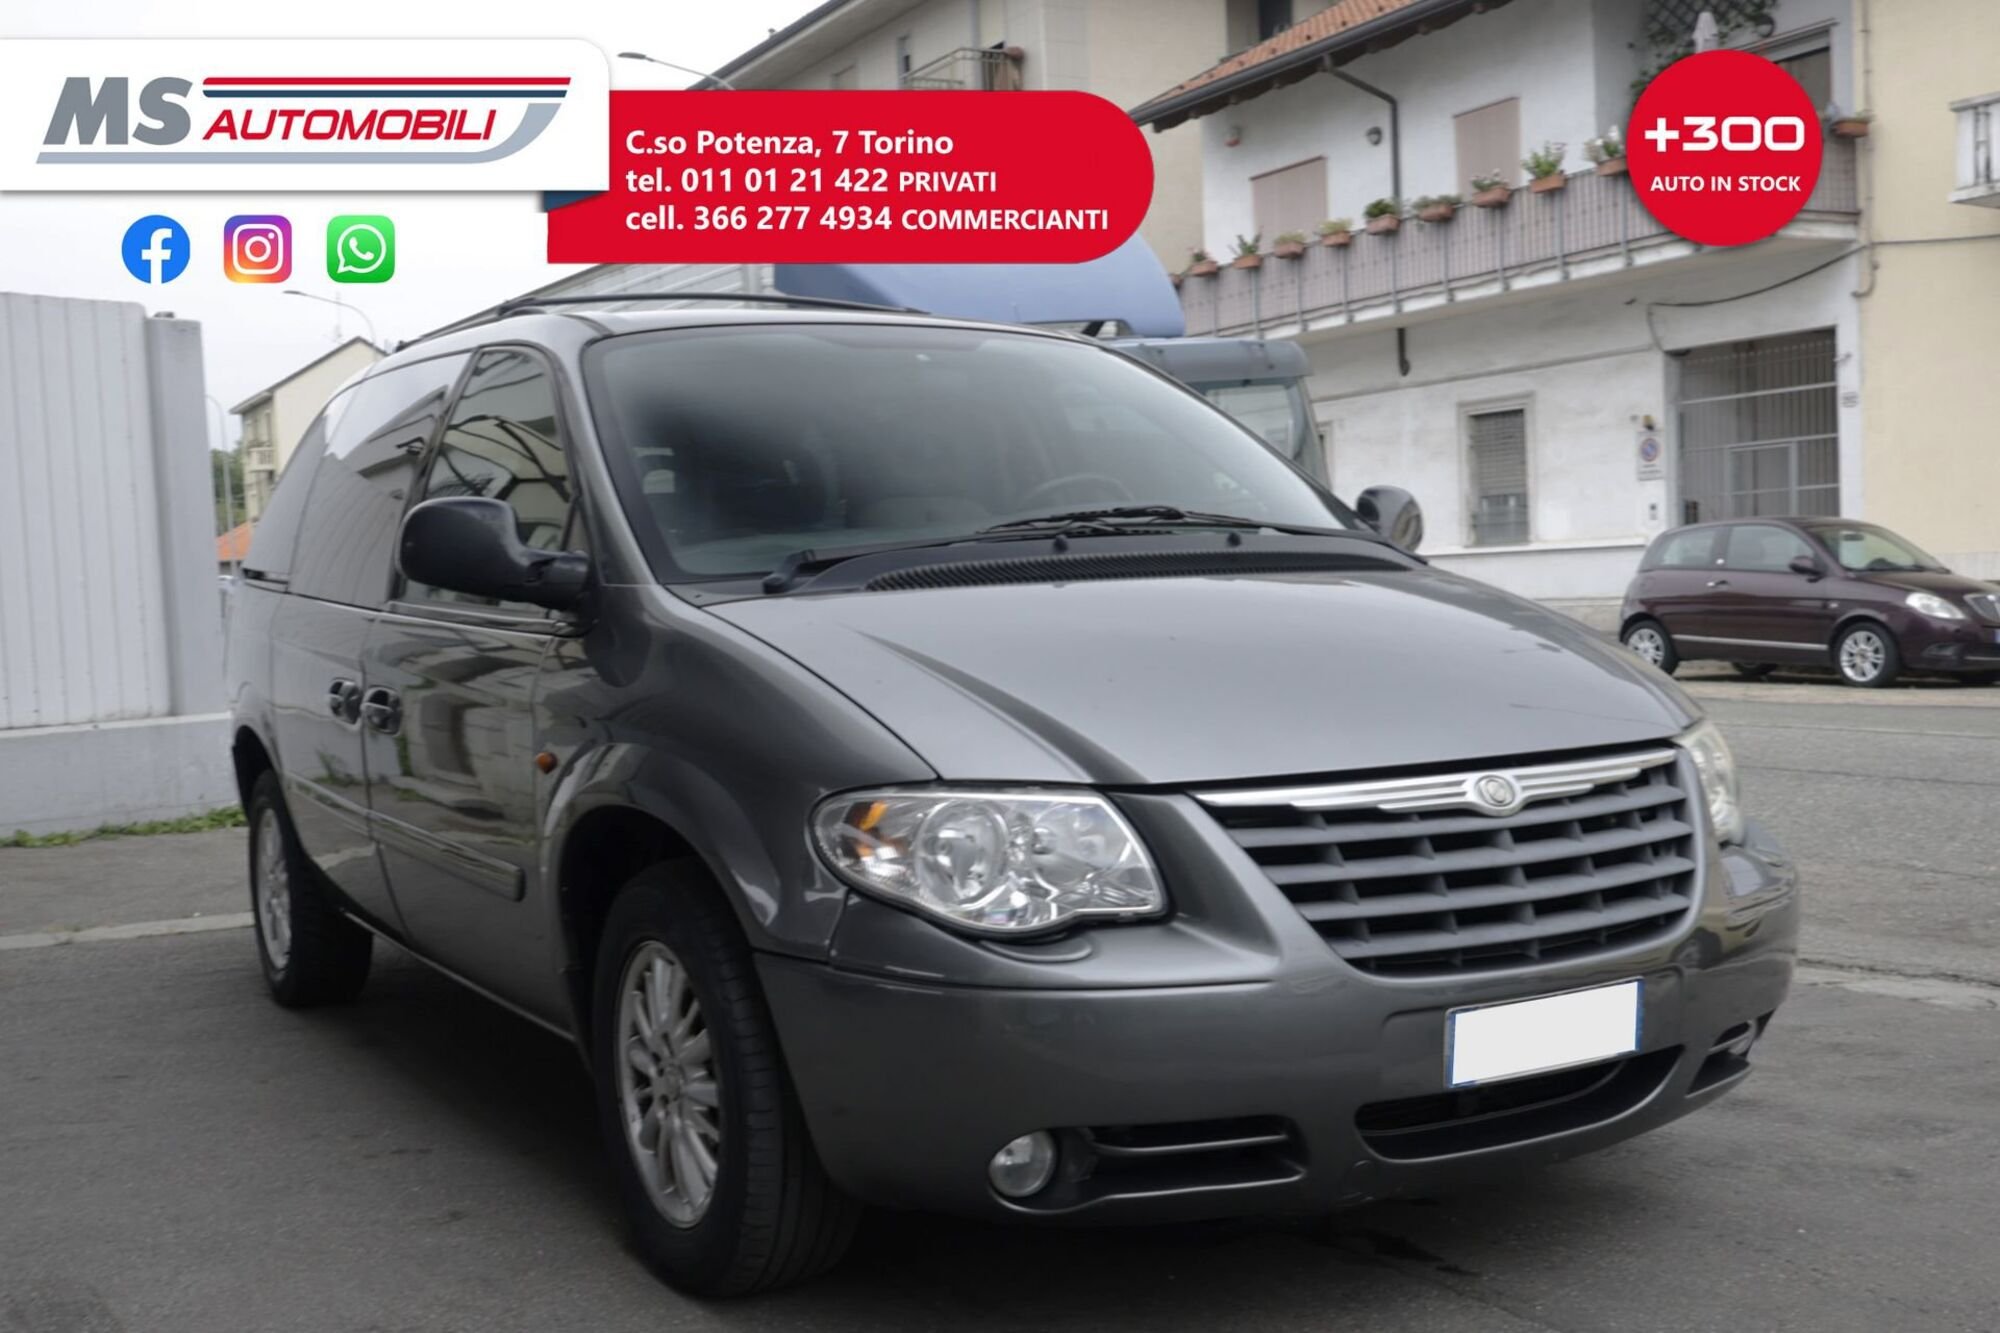 Chrysler Voyager 2.8 CRD cat LX Auto 